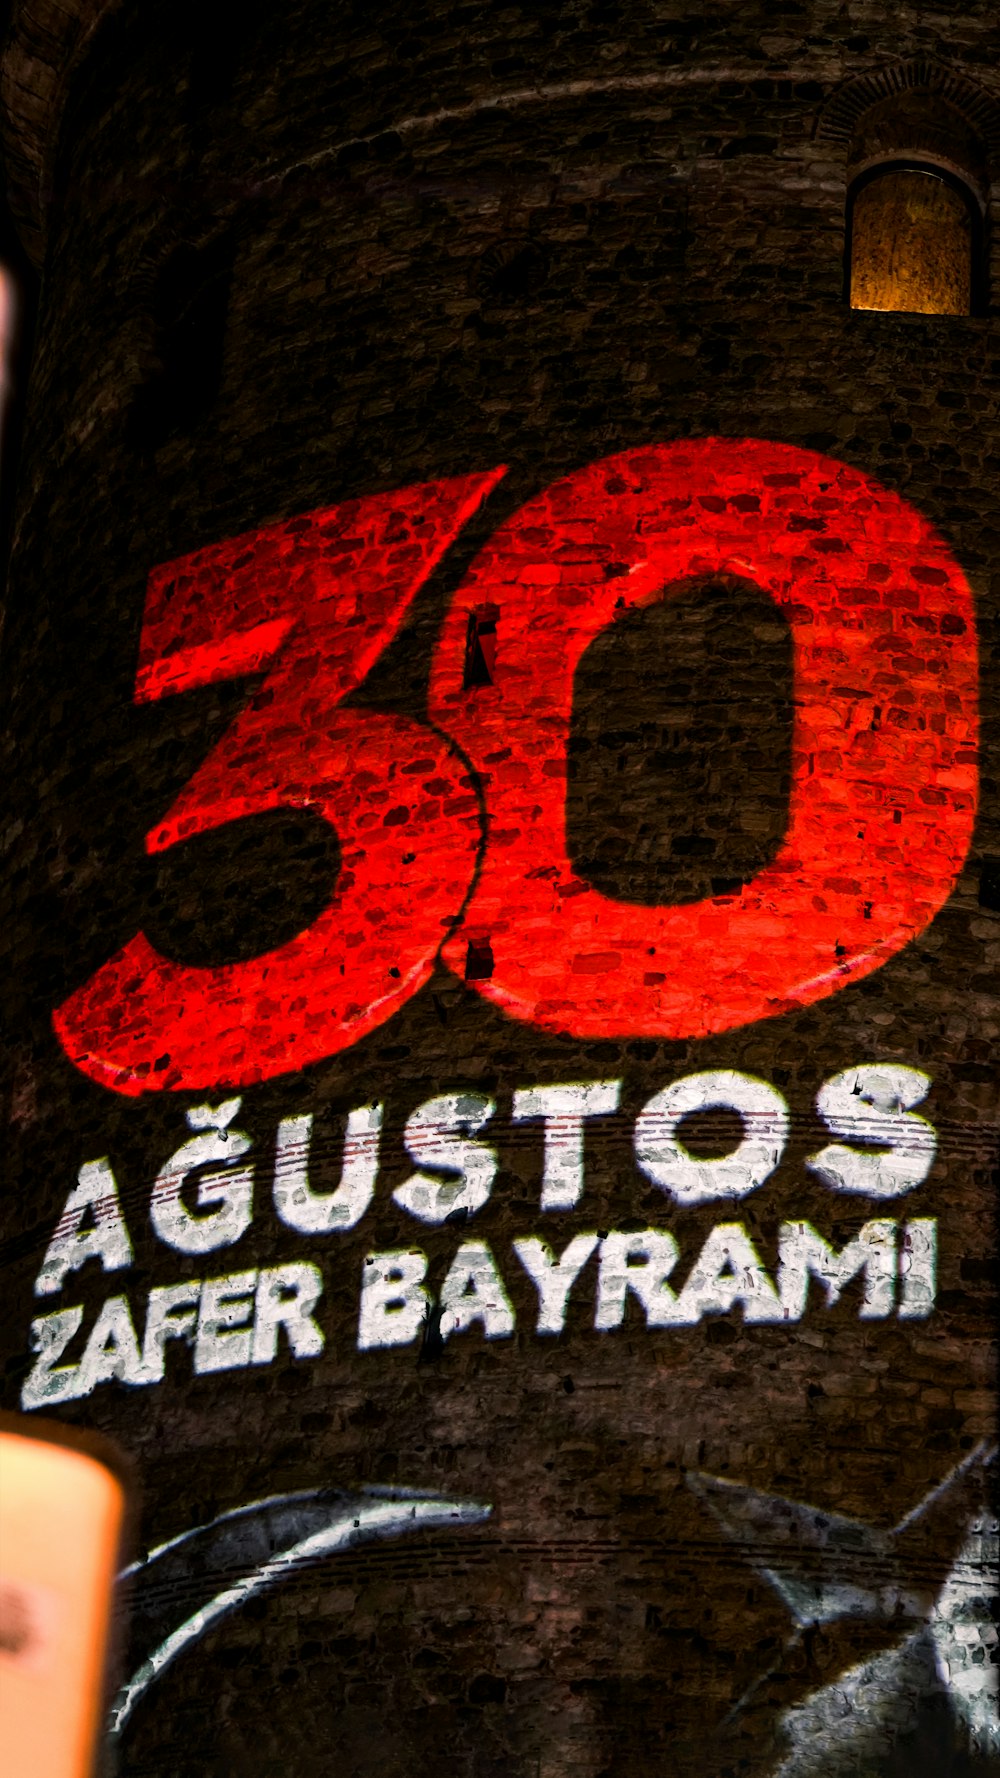 a black and red shirt with a skull and text